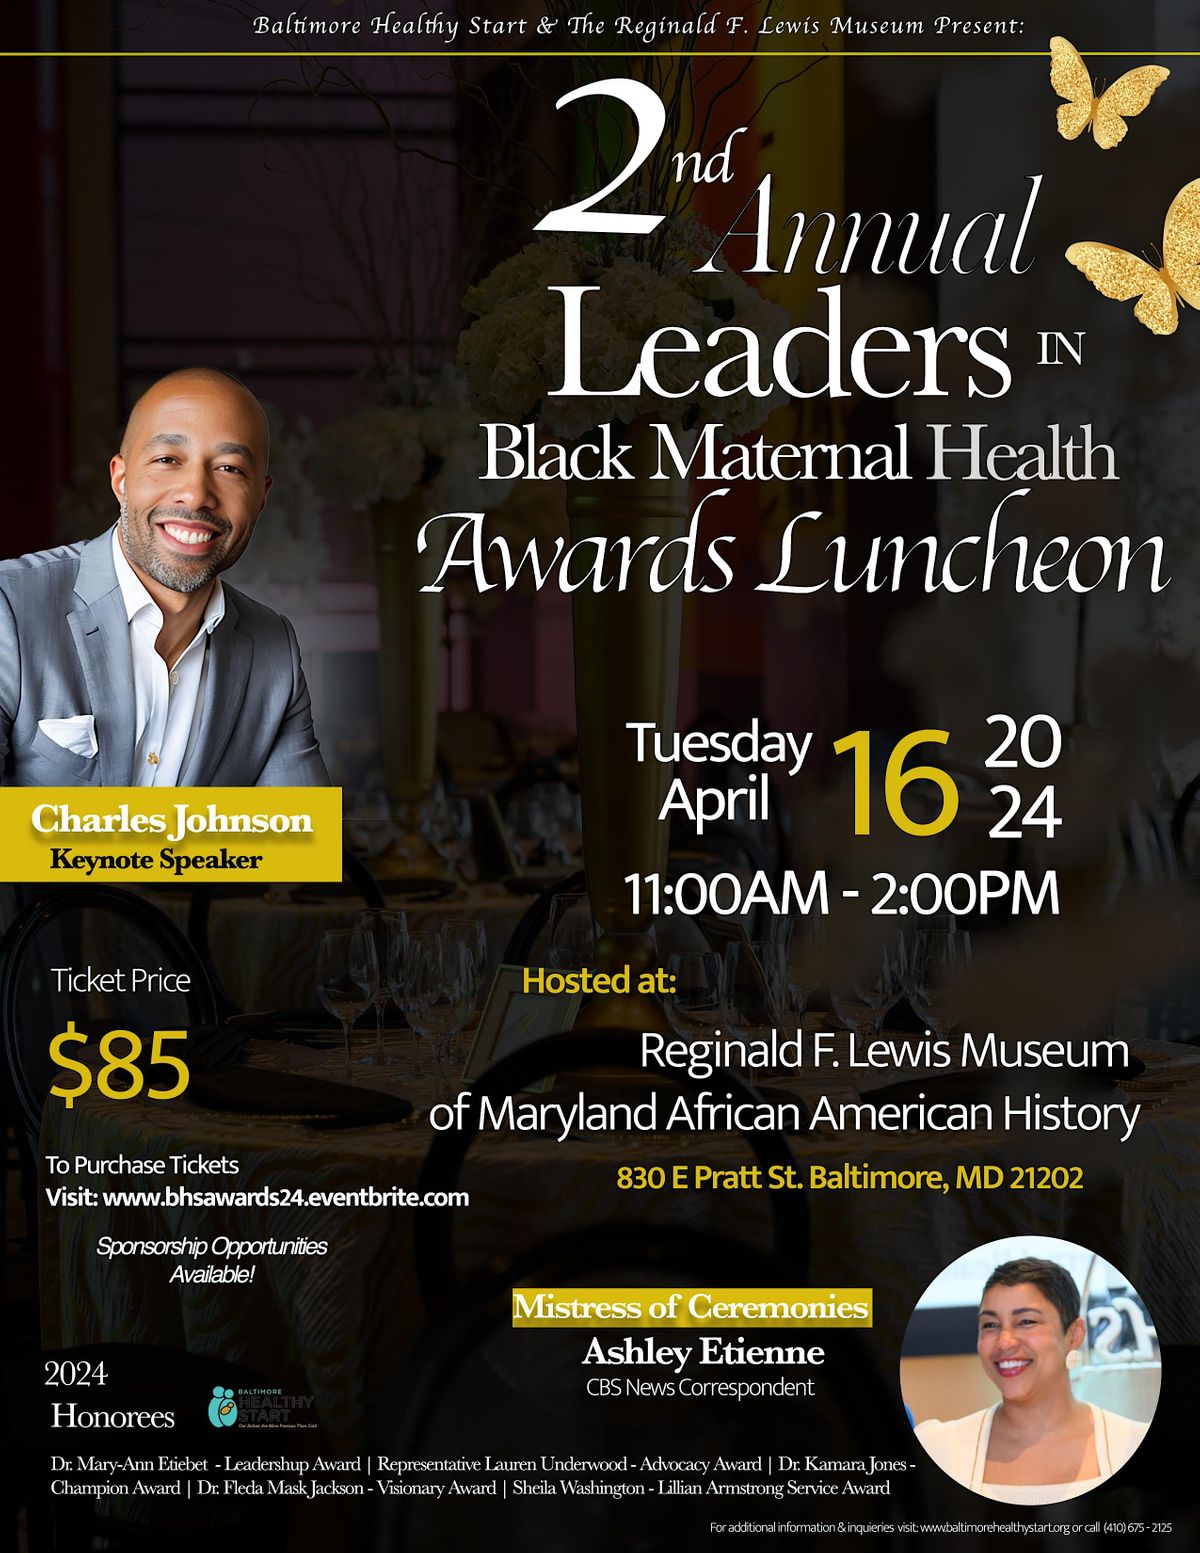 2nd Annual Leaders In Black Maternal Health Awards Luncheon